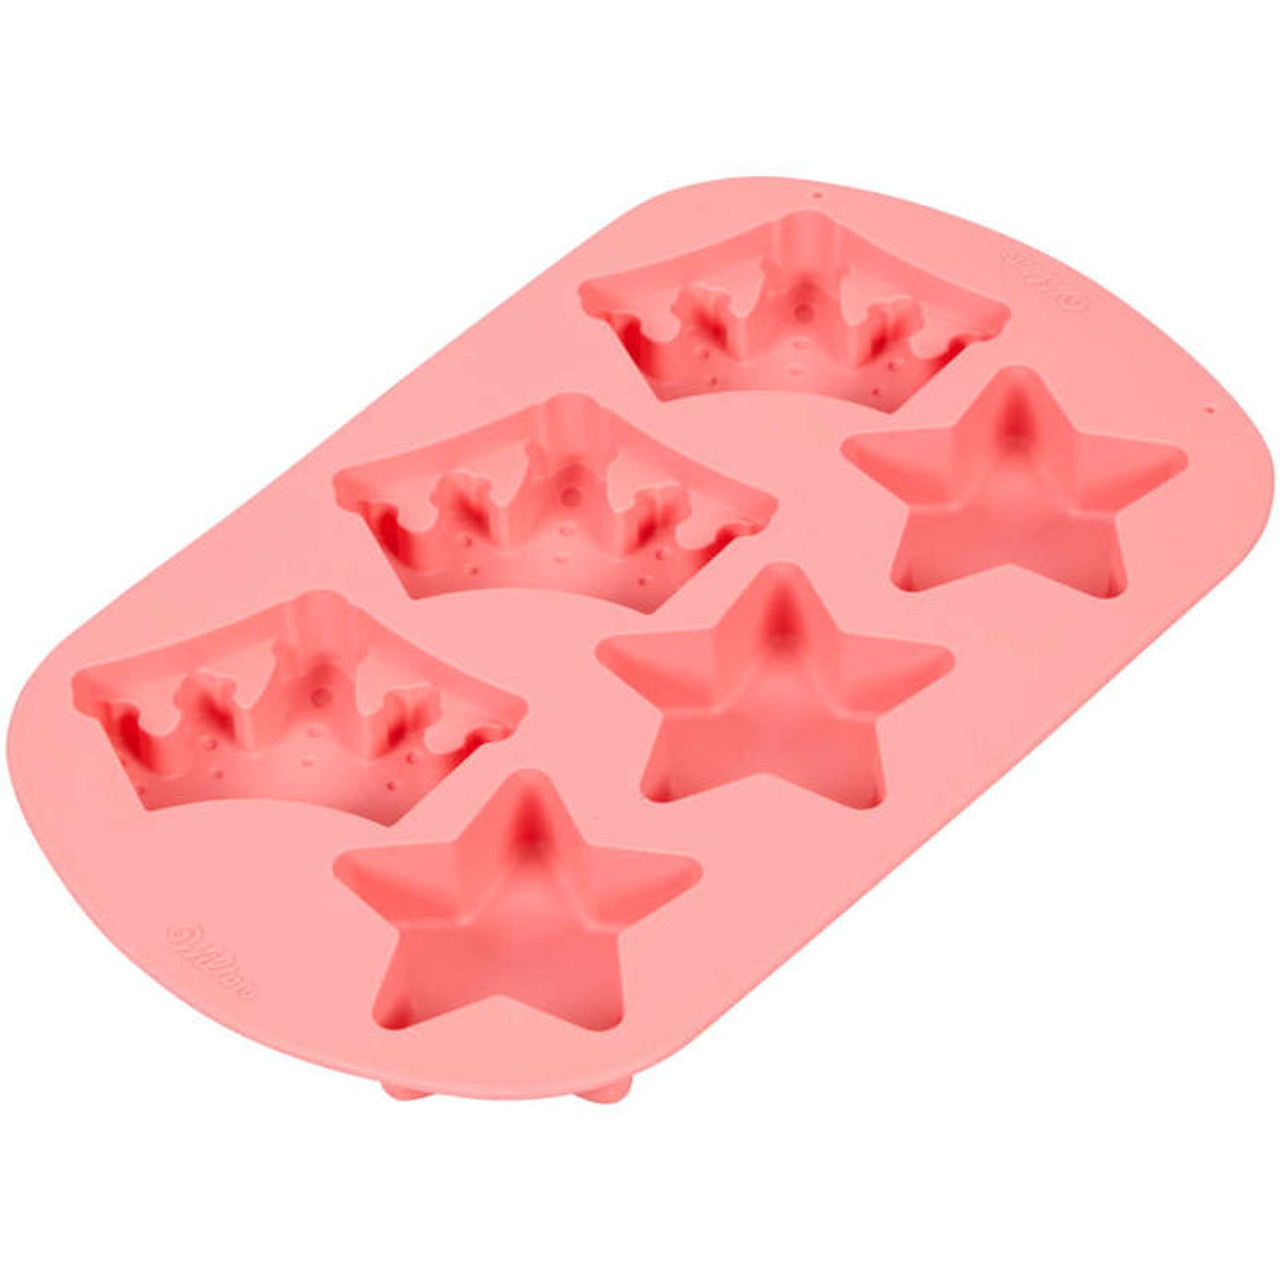 Wilton Floral Party Silicone Mold, 6-Cavity